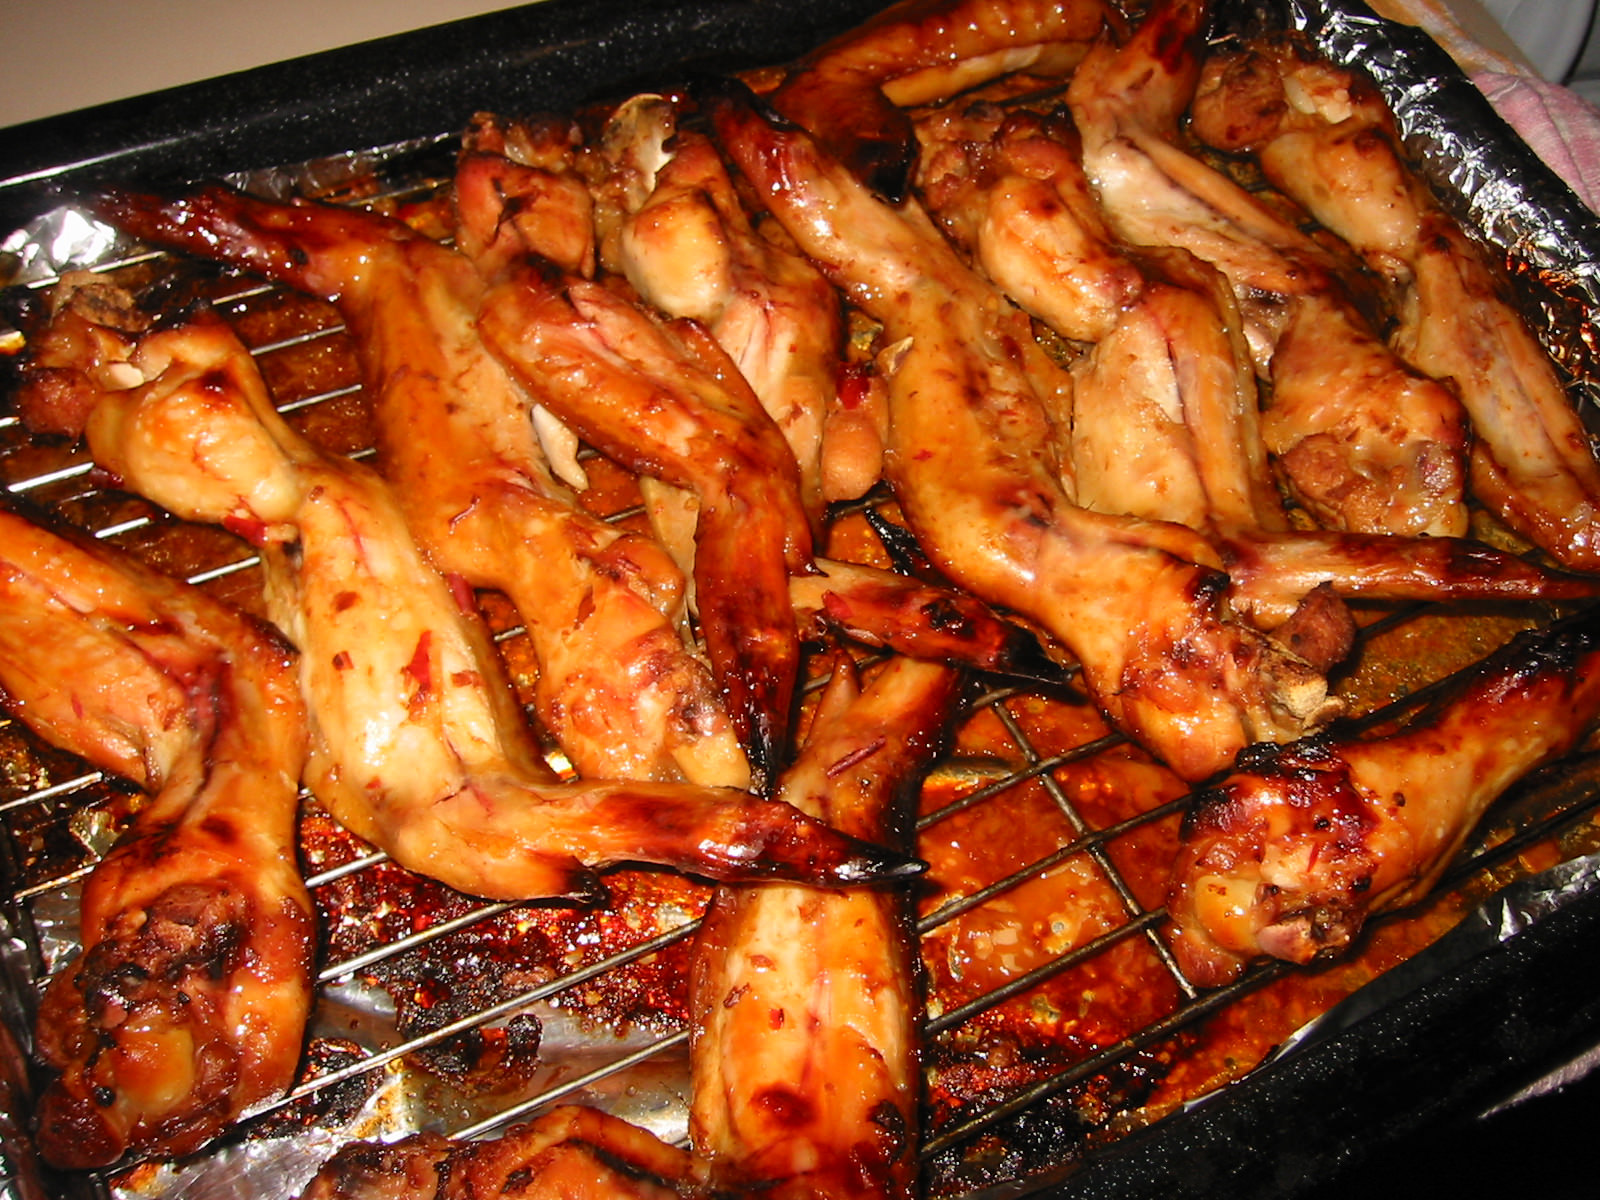 Marinated chicken wings - on the oven tray